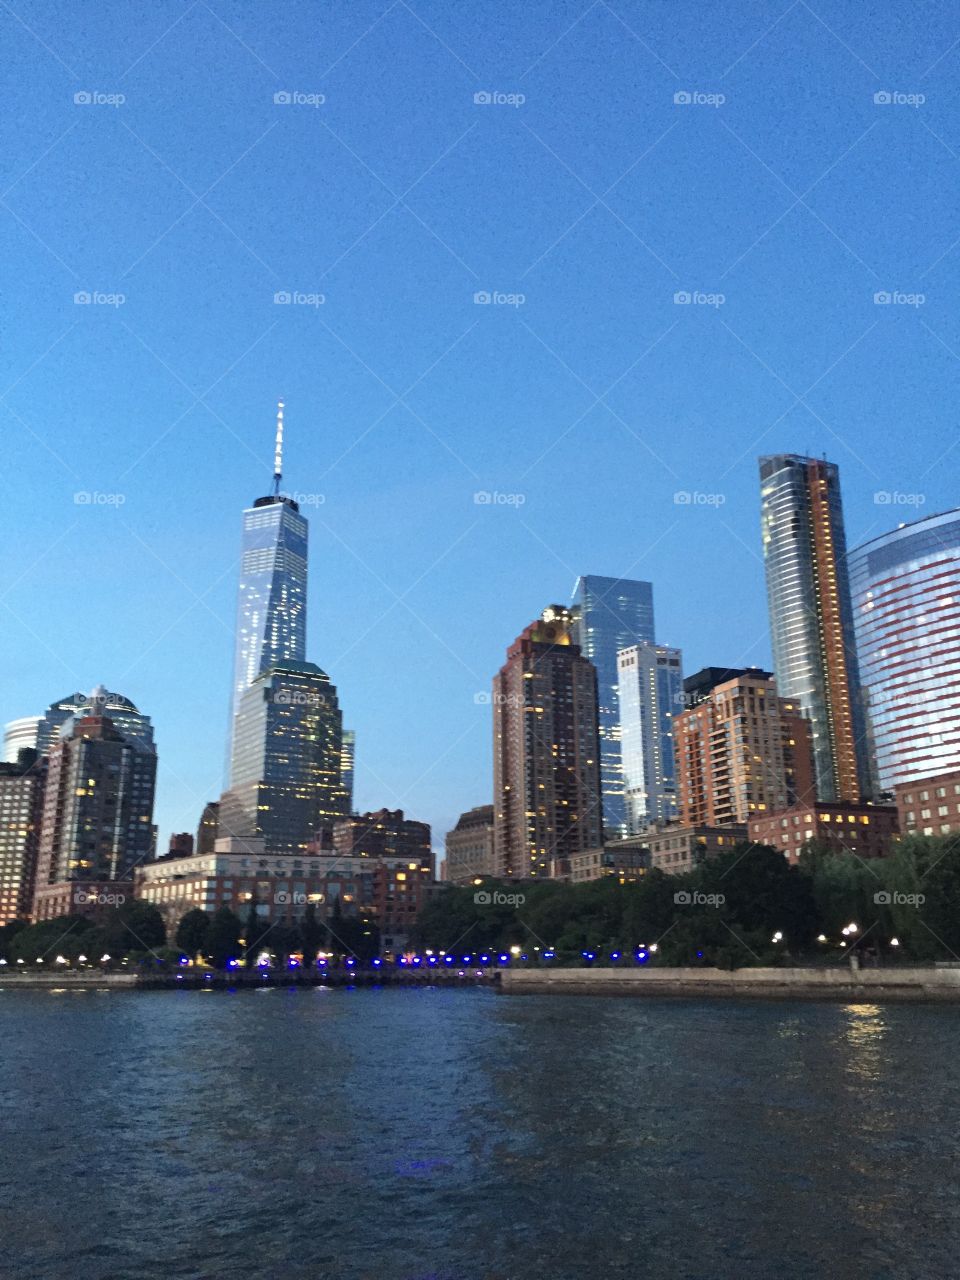 Water view of the downtown NYC skyline including the new Freedom tower